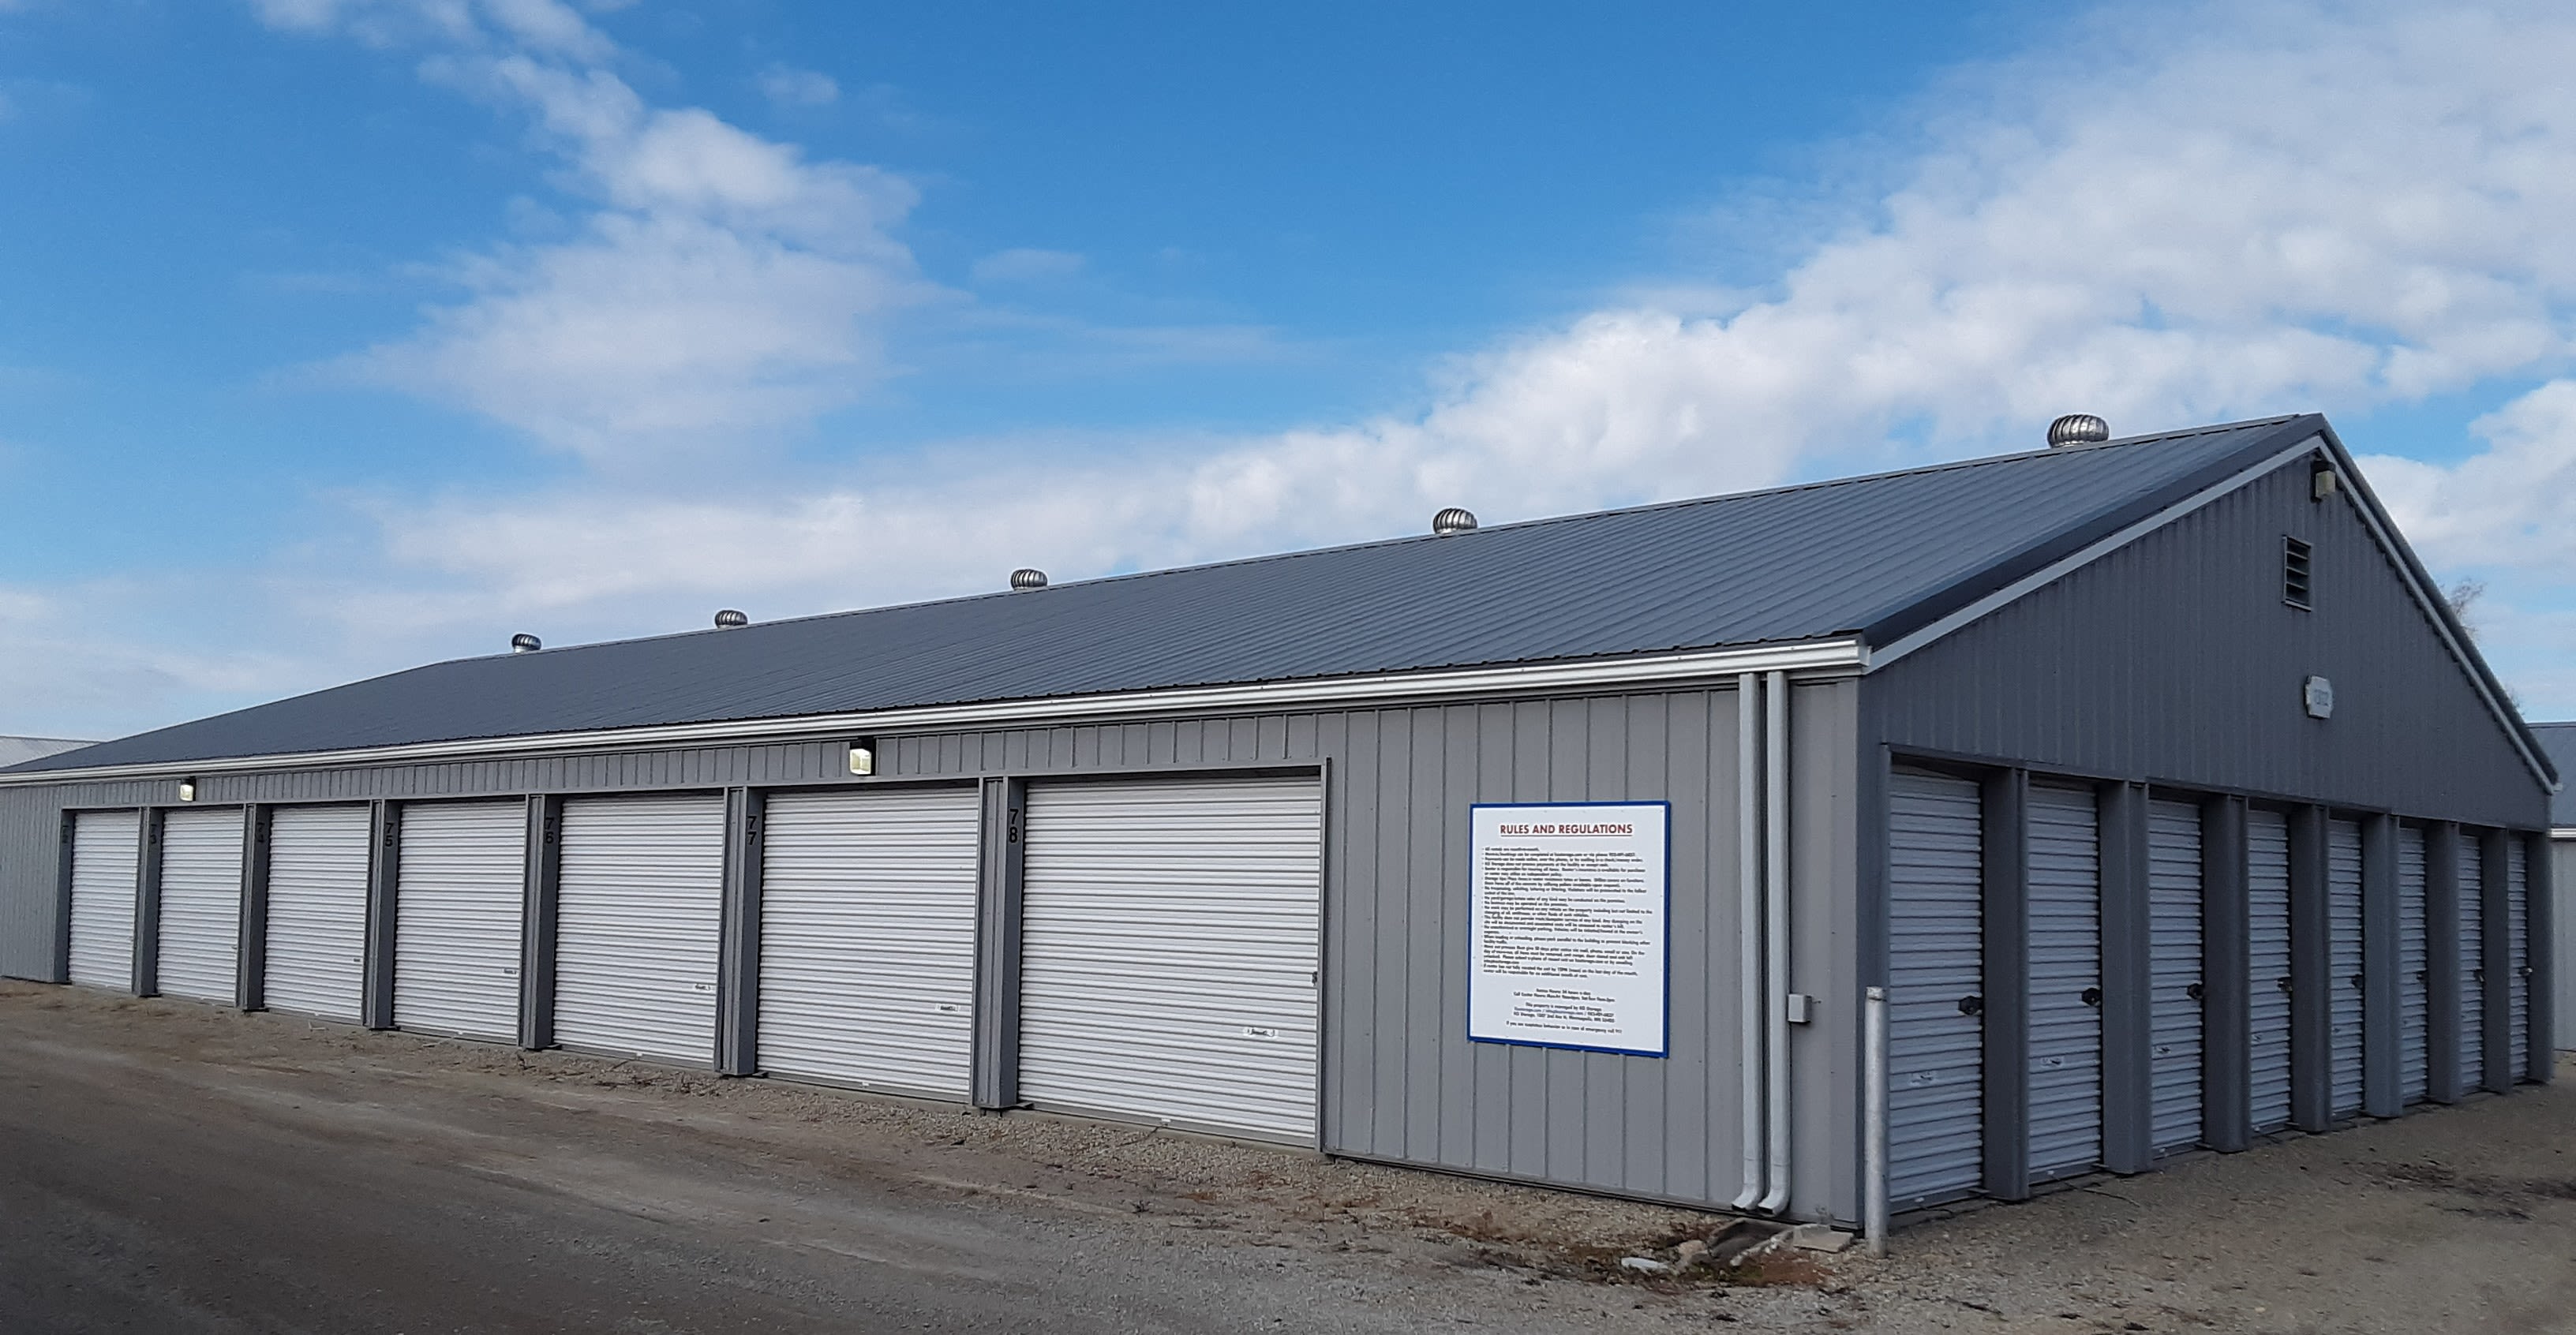 Learn more about features at KO Storage of Waseca 5th St in Waseca, Minnesota